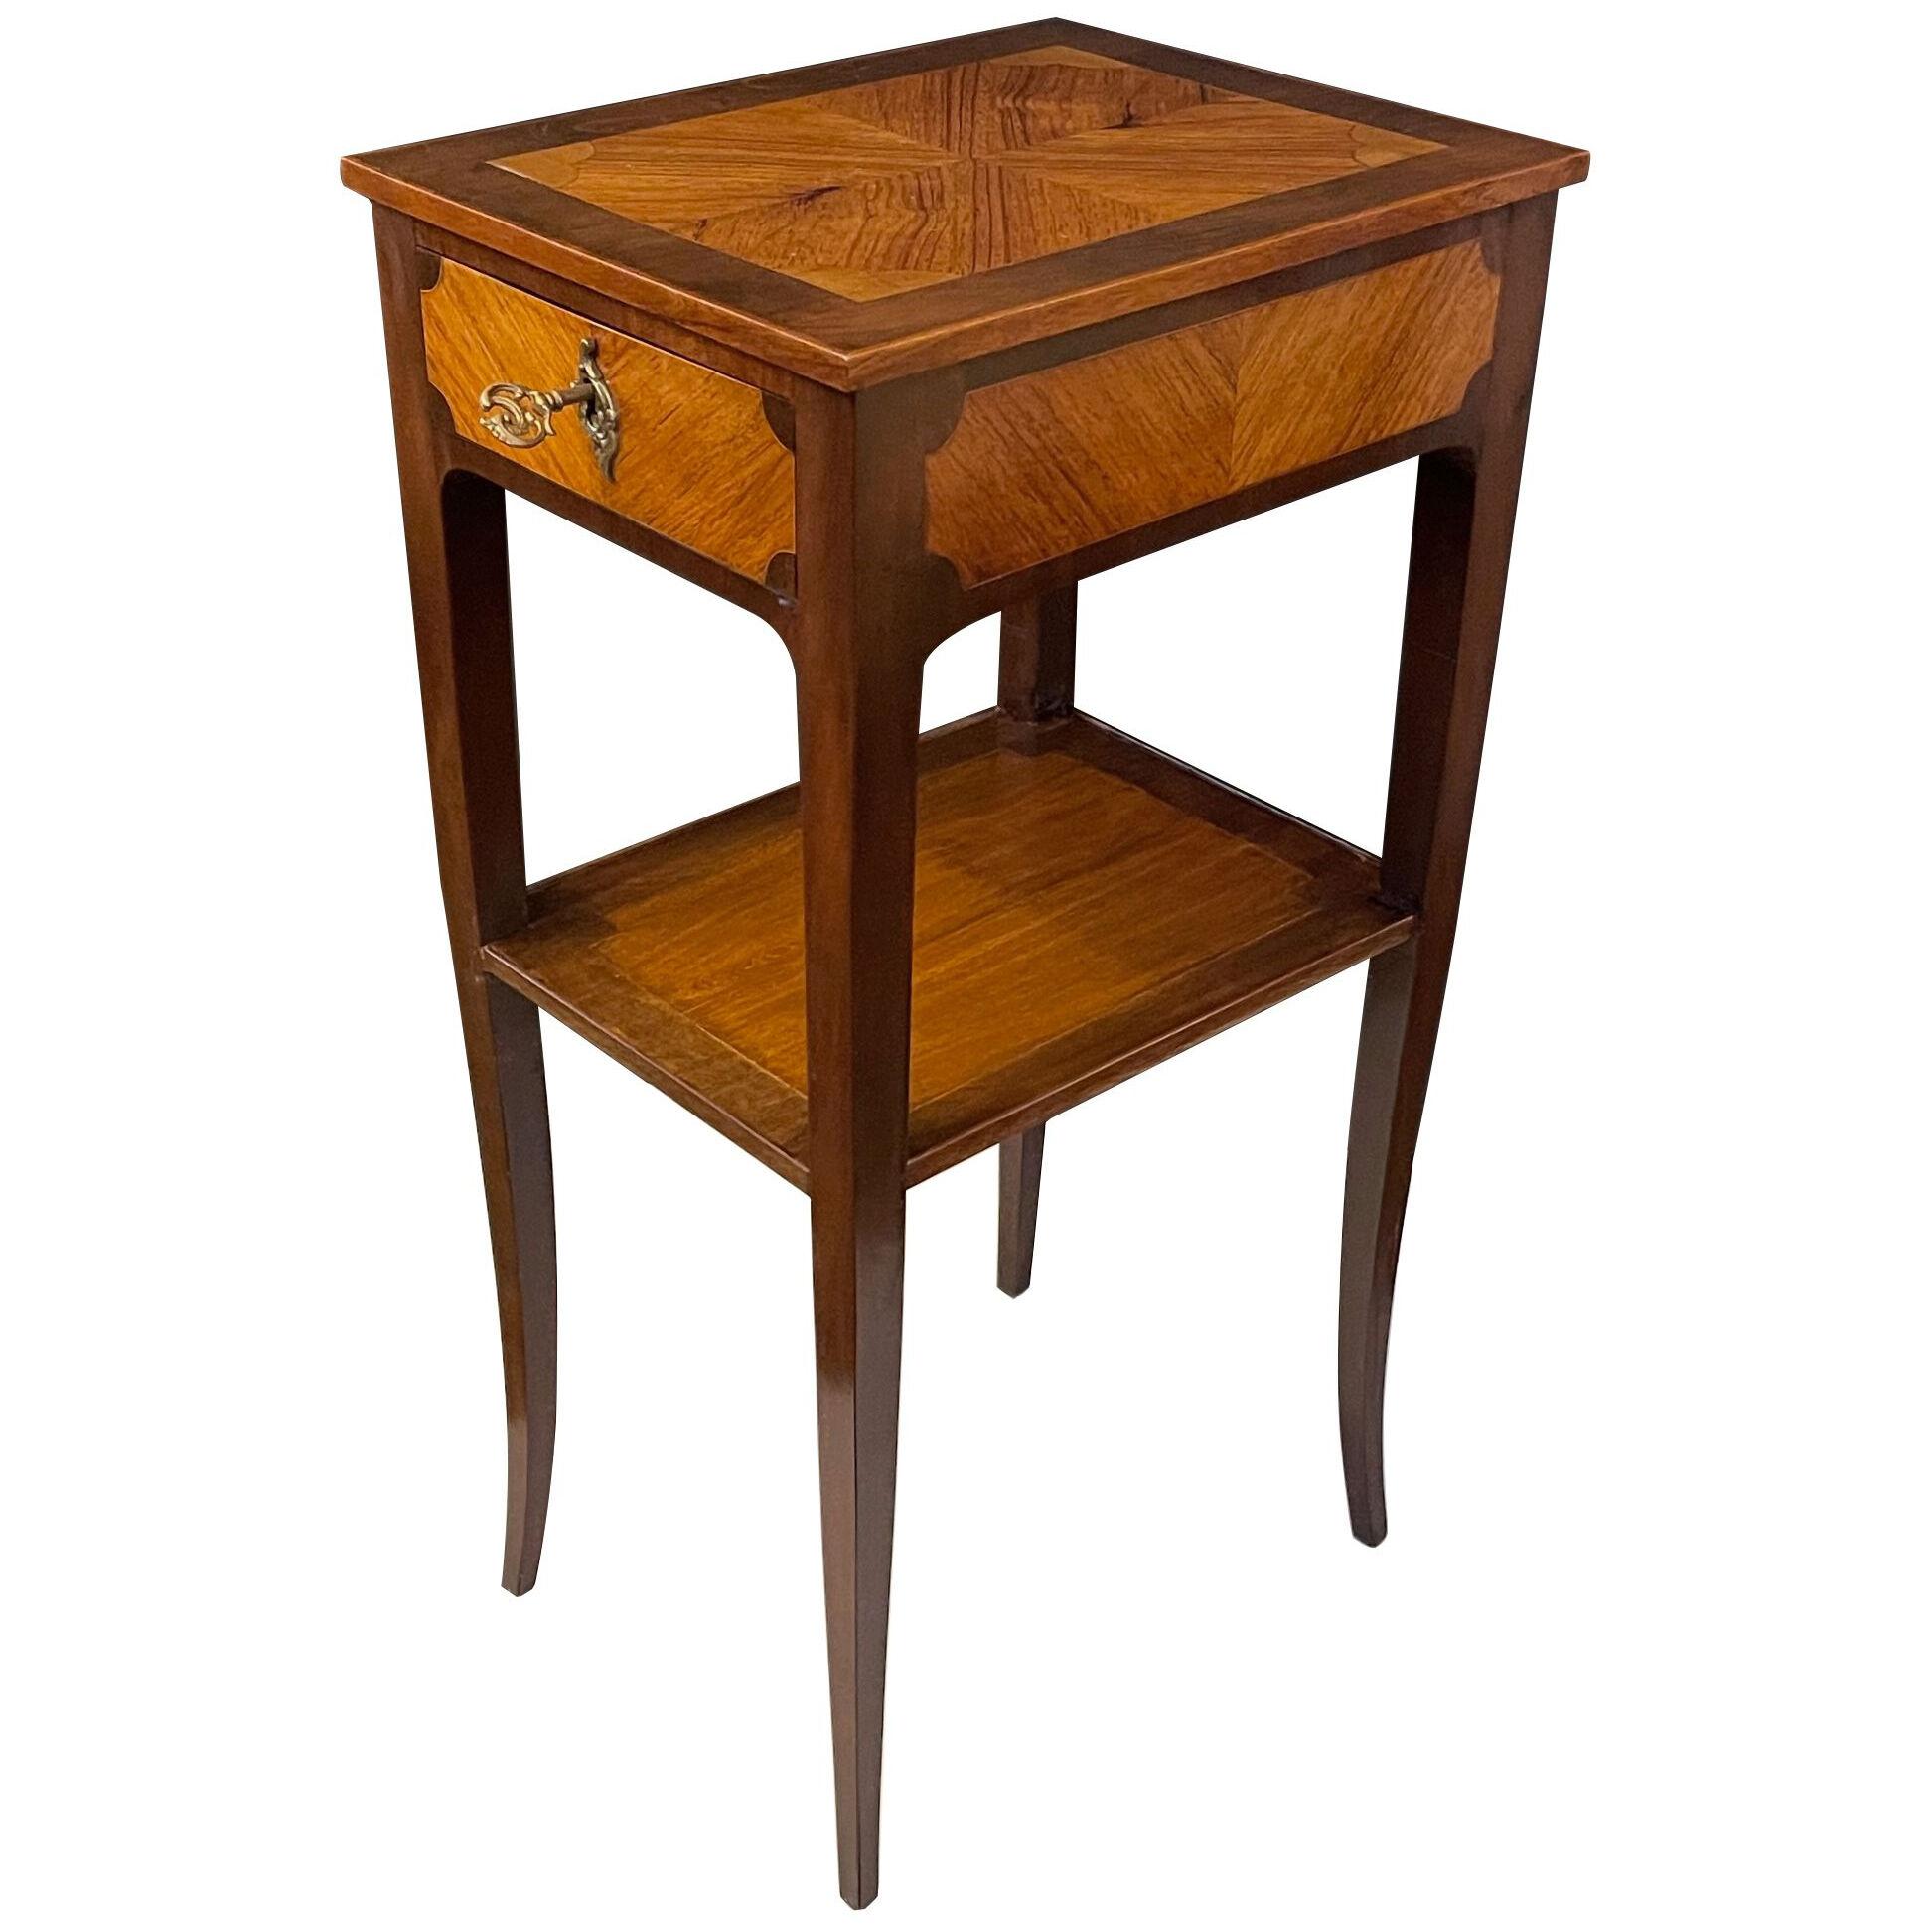 French 19th century mixed-wood transition style single-drawer side table